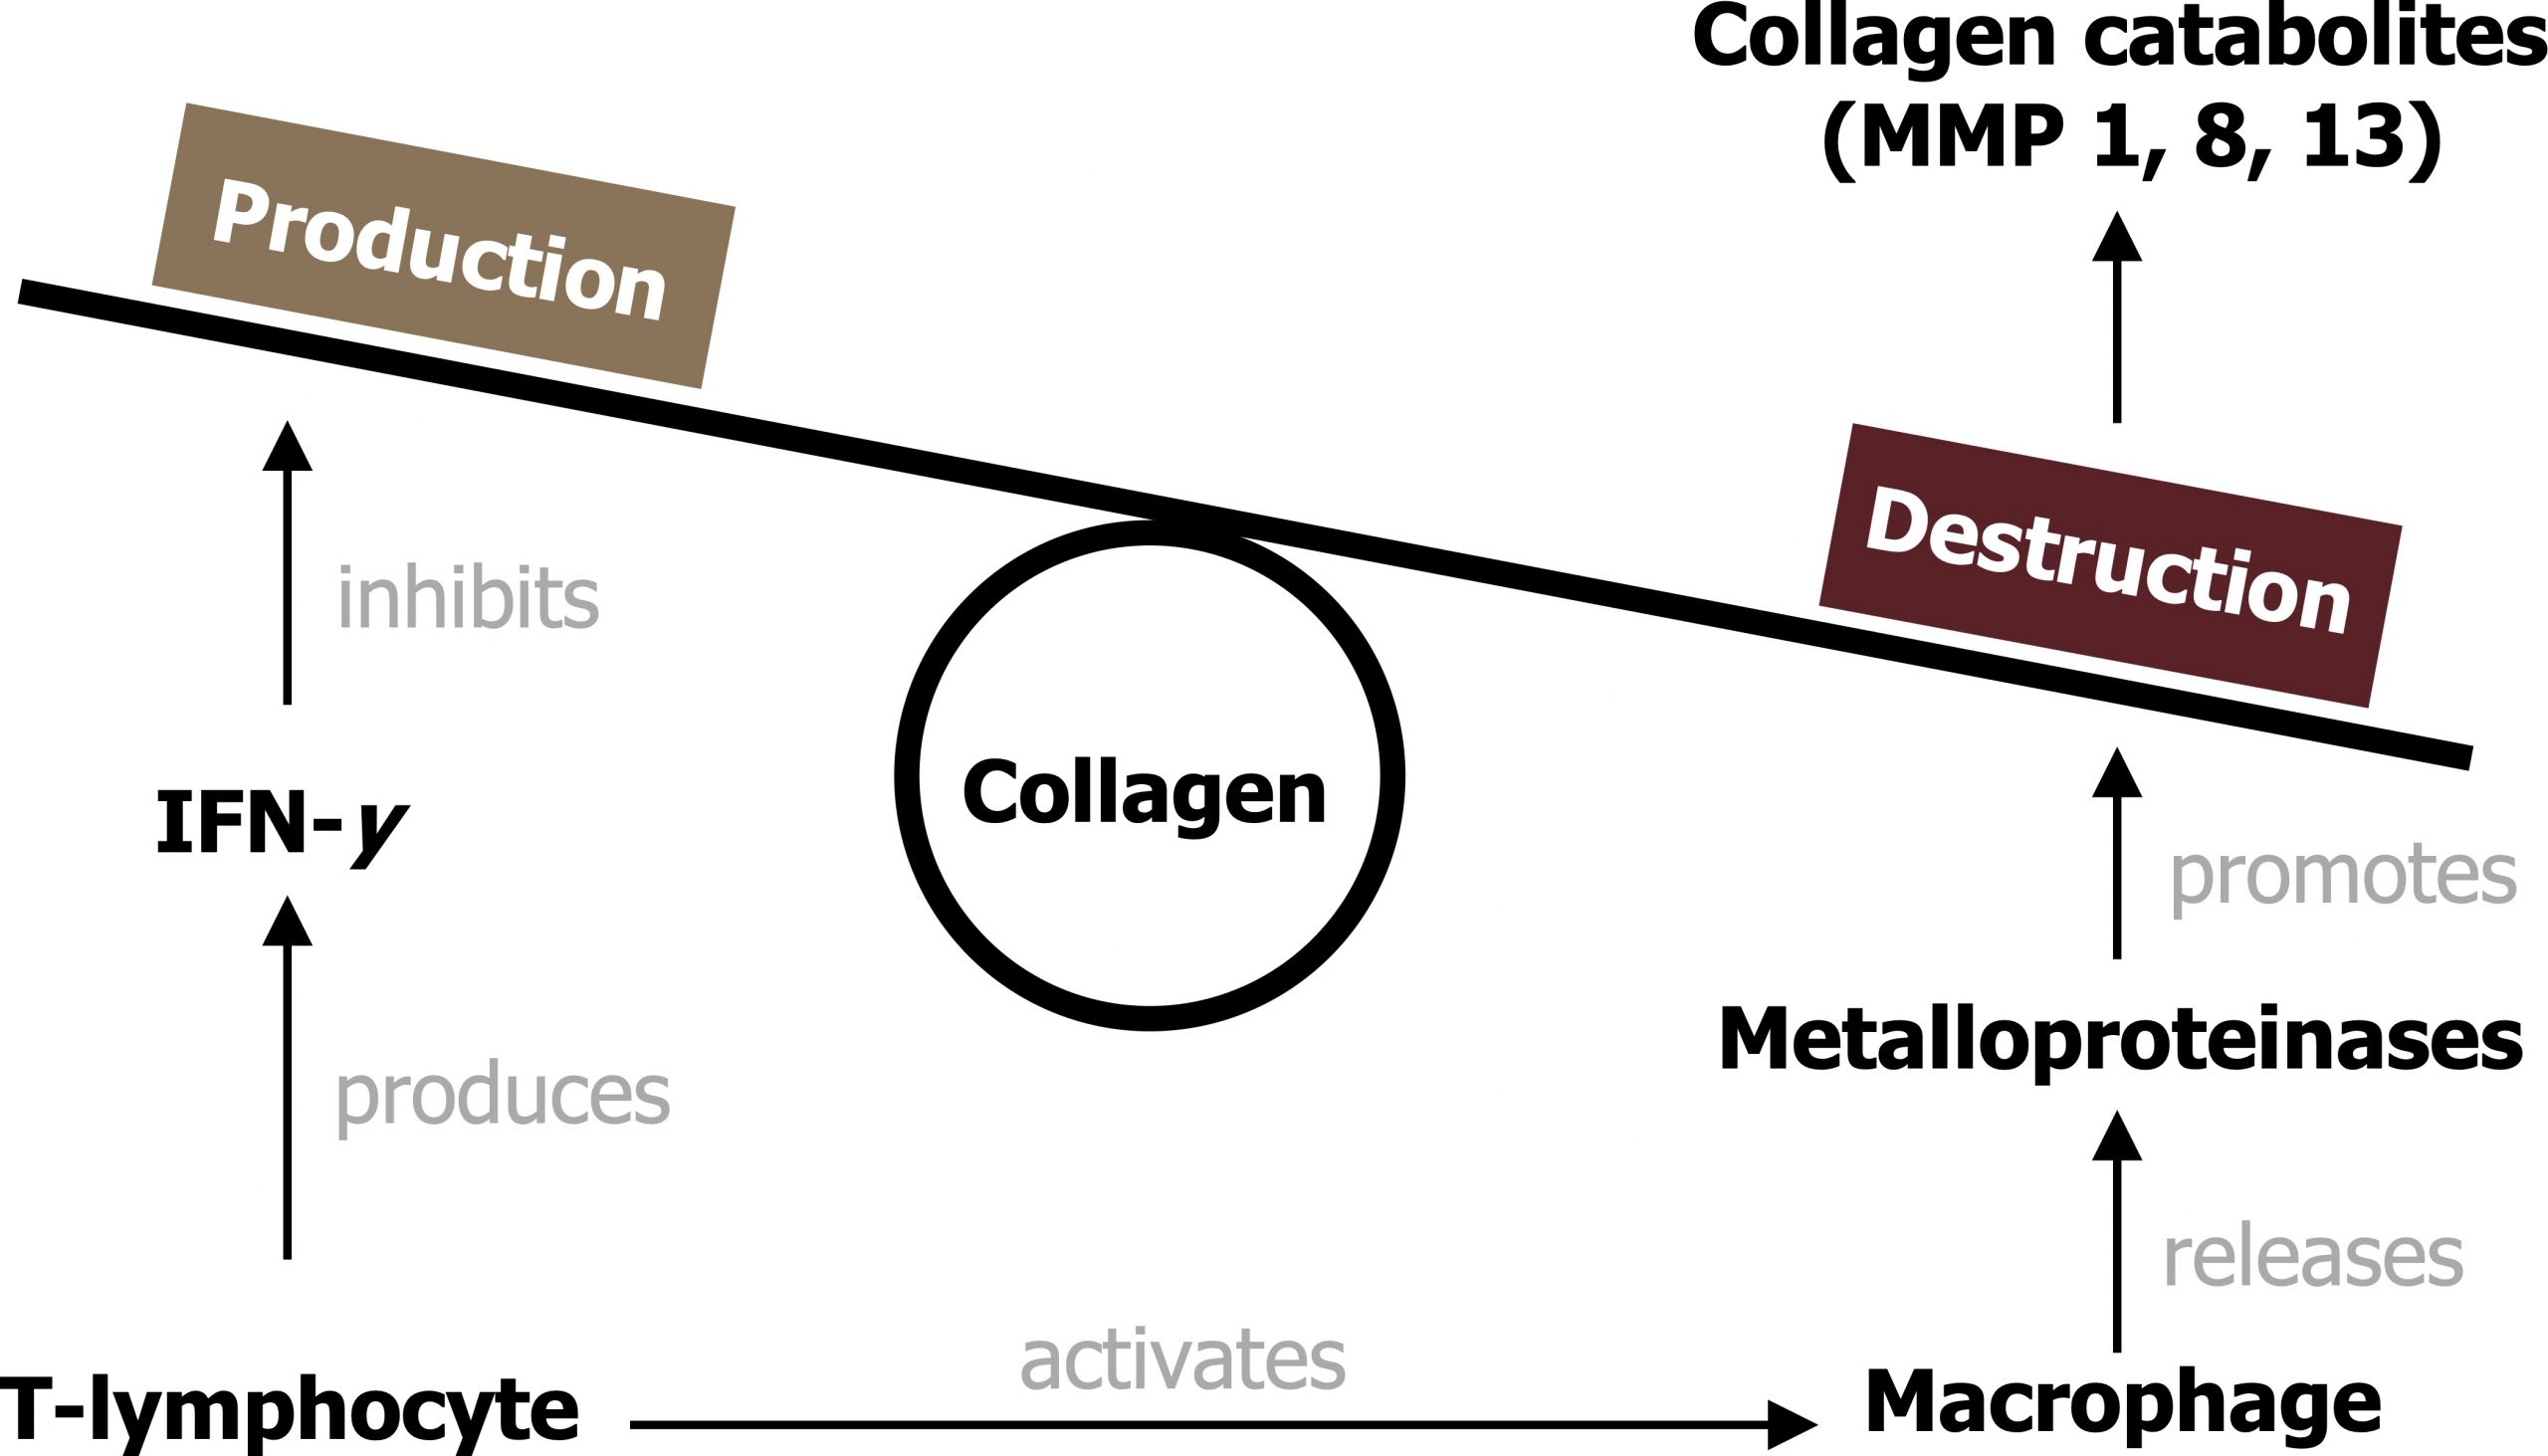 Circle with text collagen with a flat line resting on top. The left of the line is raised higher and has a rectangle with text production and the right side is lower with a rectangle with text destruction. T-lymphocyte arrow with text produces to IFN-y arrow with text inhibits to production. T-lymphocyte arrow with text activates to macrophage arrow with text releases to metalloproteinases arrow with text promotes to destruction arrow to collagen catabolites (MMP 1, 8, 13)